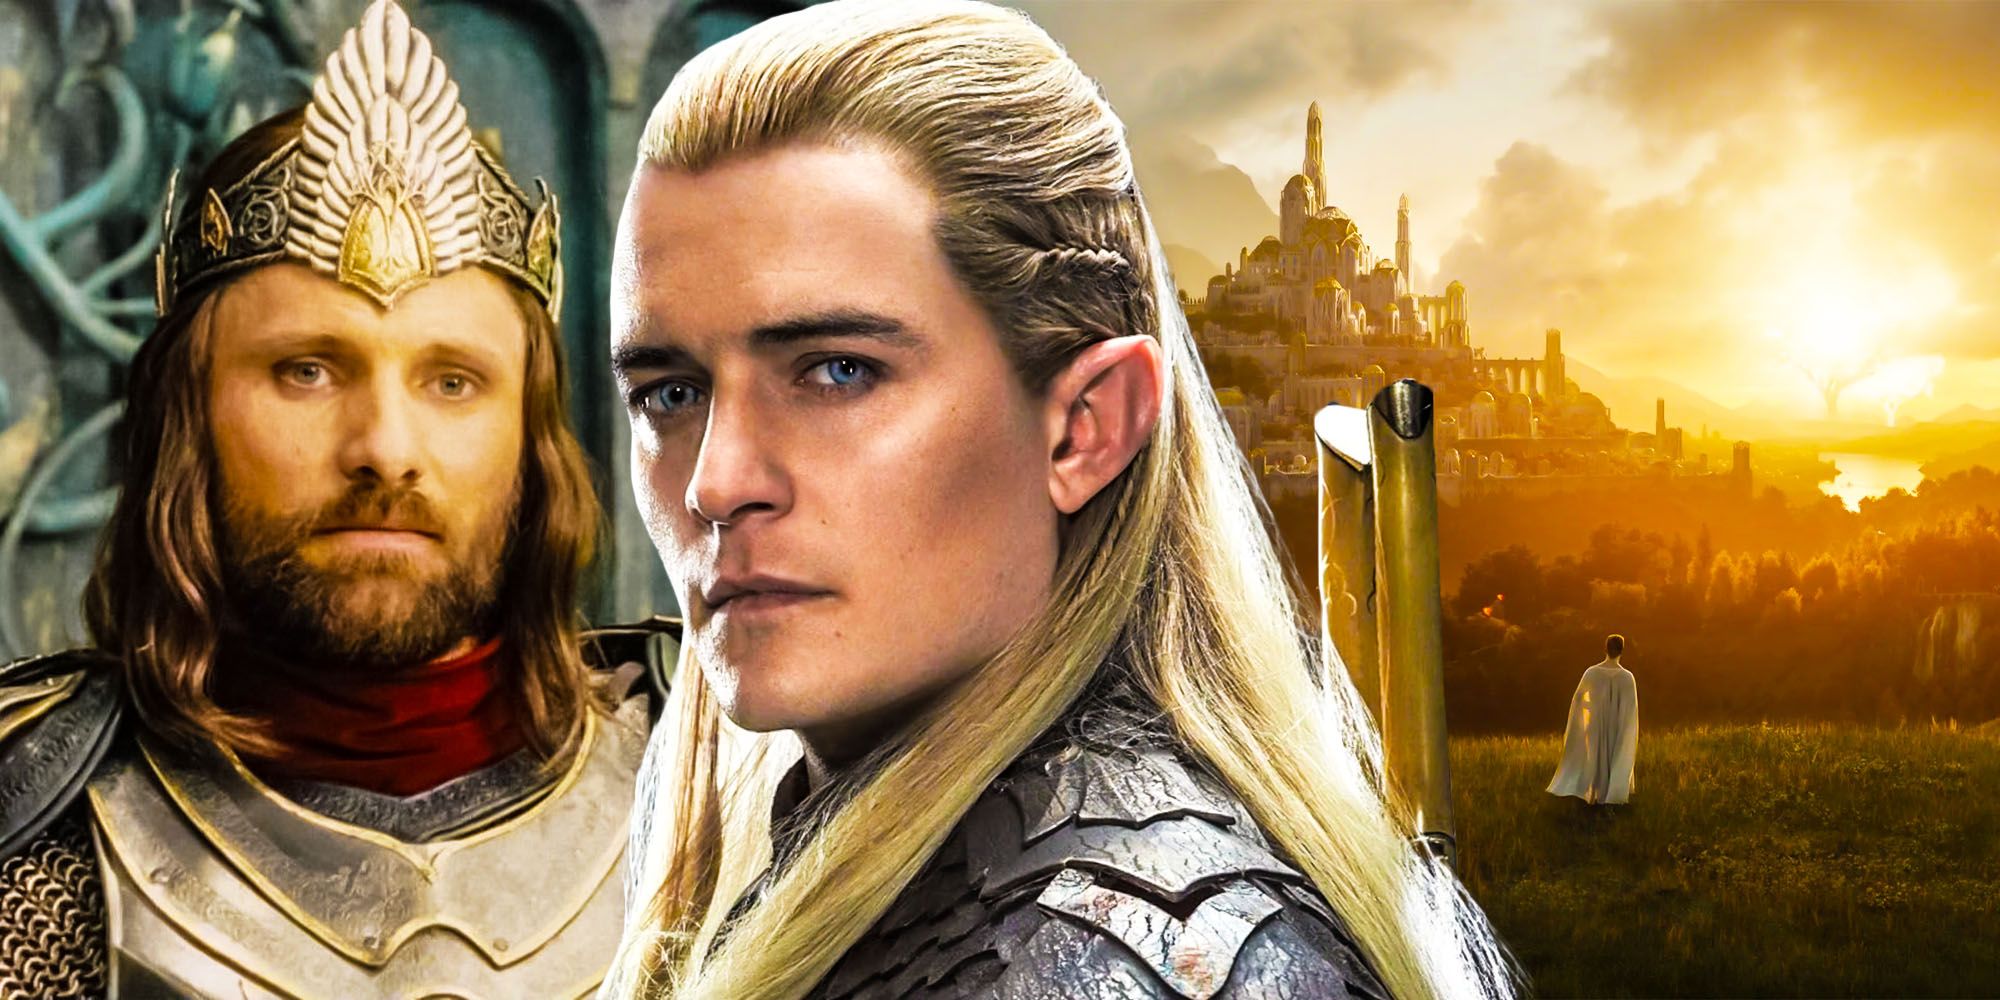 Amazons lord of the rings needs to reference tolkiens wider world legolas aragorn